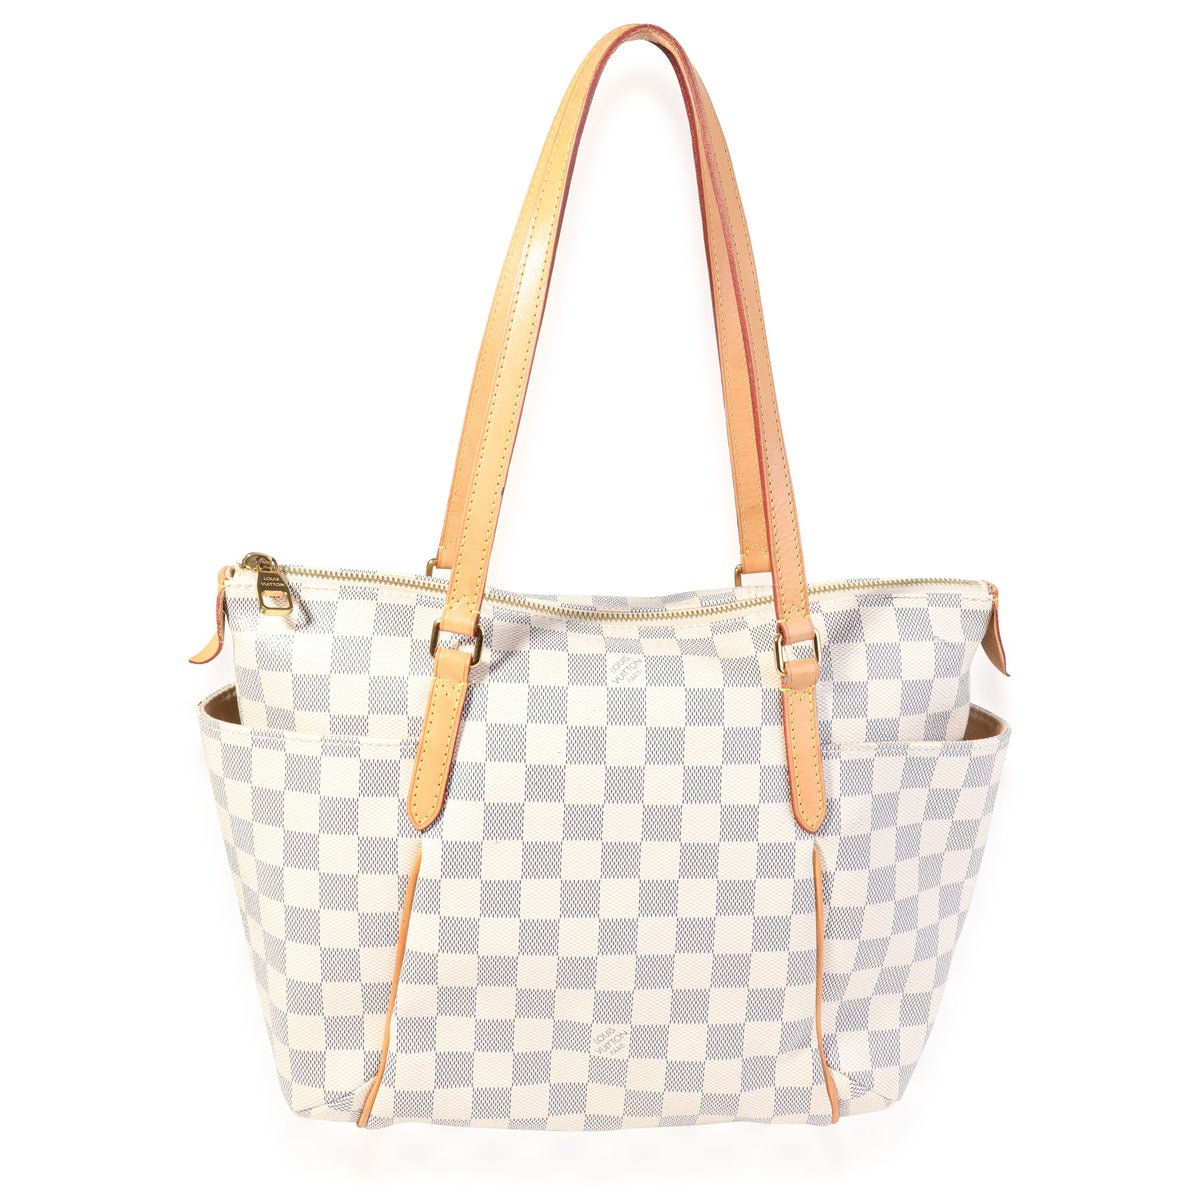 Louis Vuitton Damier Azur Canvas Leather Totally Pm Tote Bag in